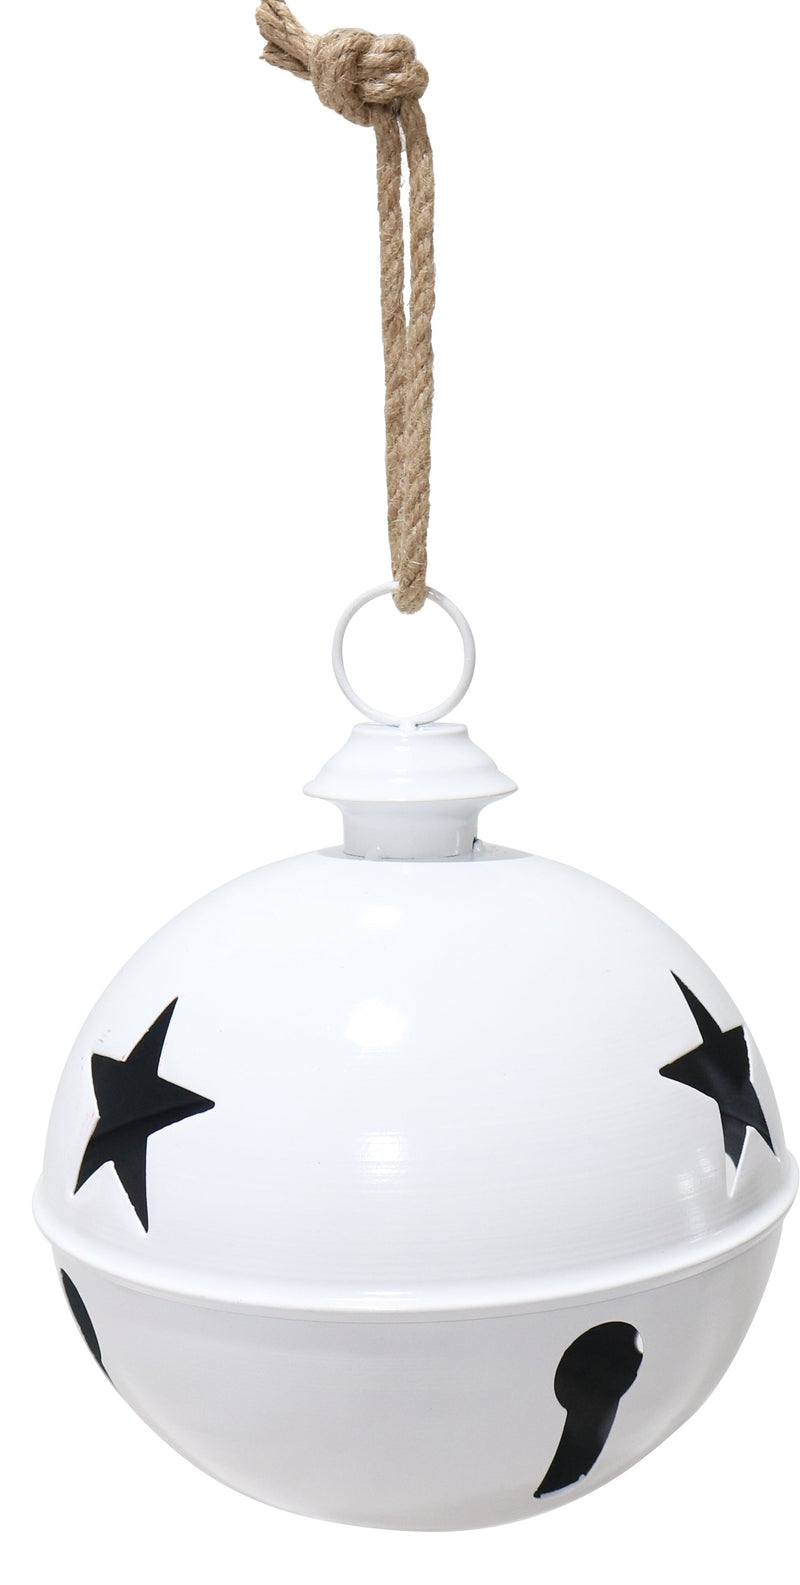 COMING SOON - ANTIQUE STARRY NUTBELL